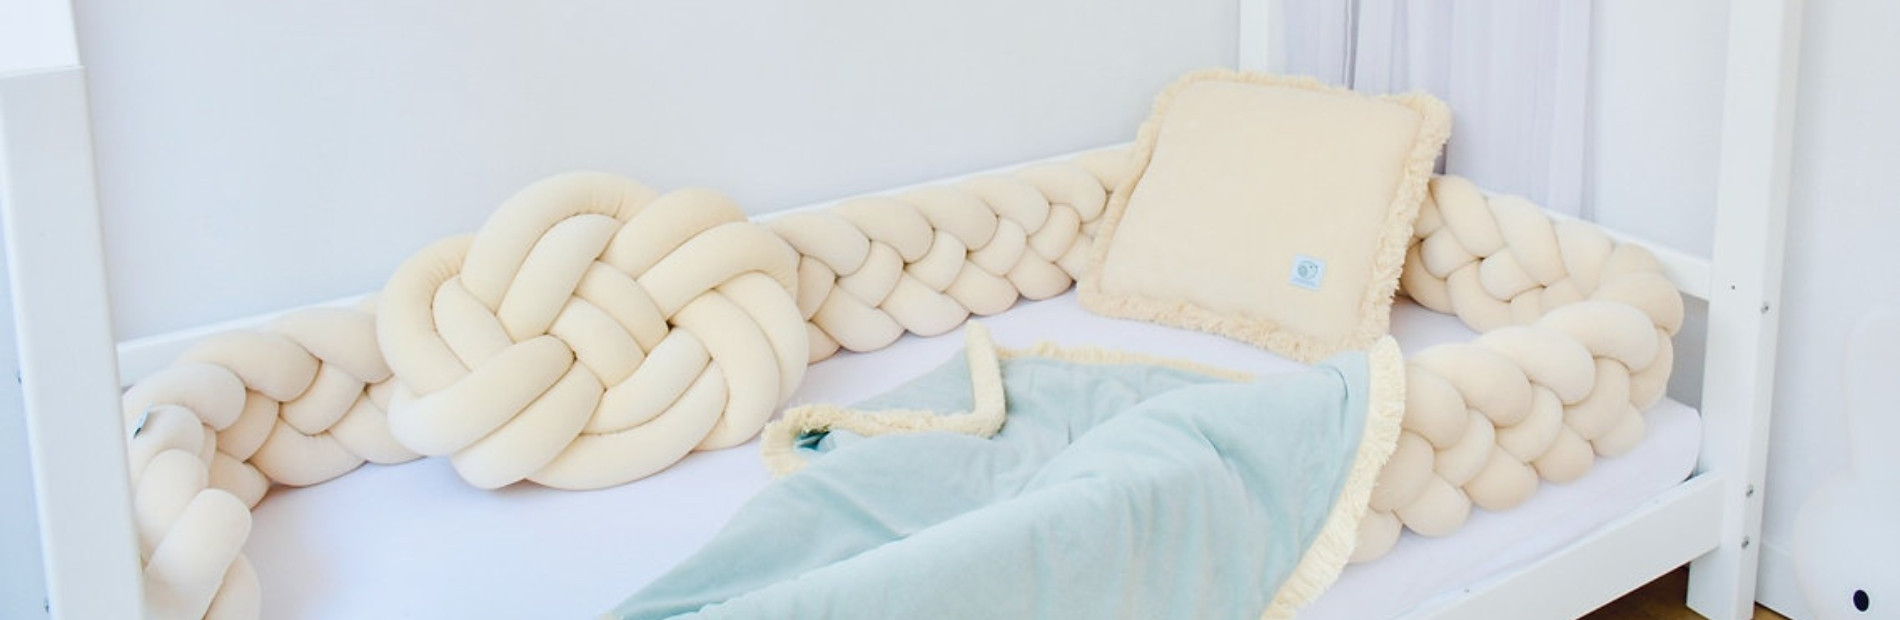 Braided Bed Bumper - 4 ropes